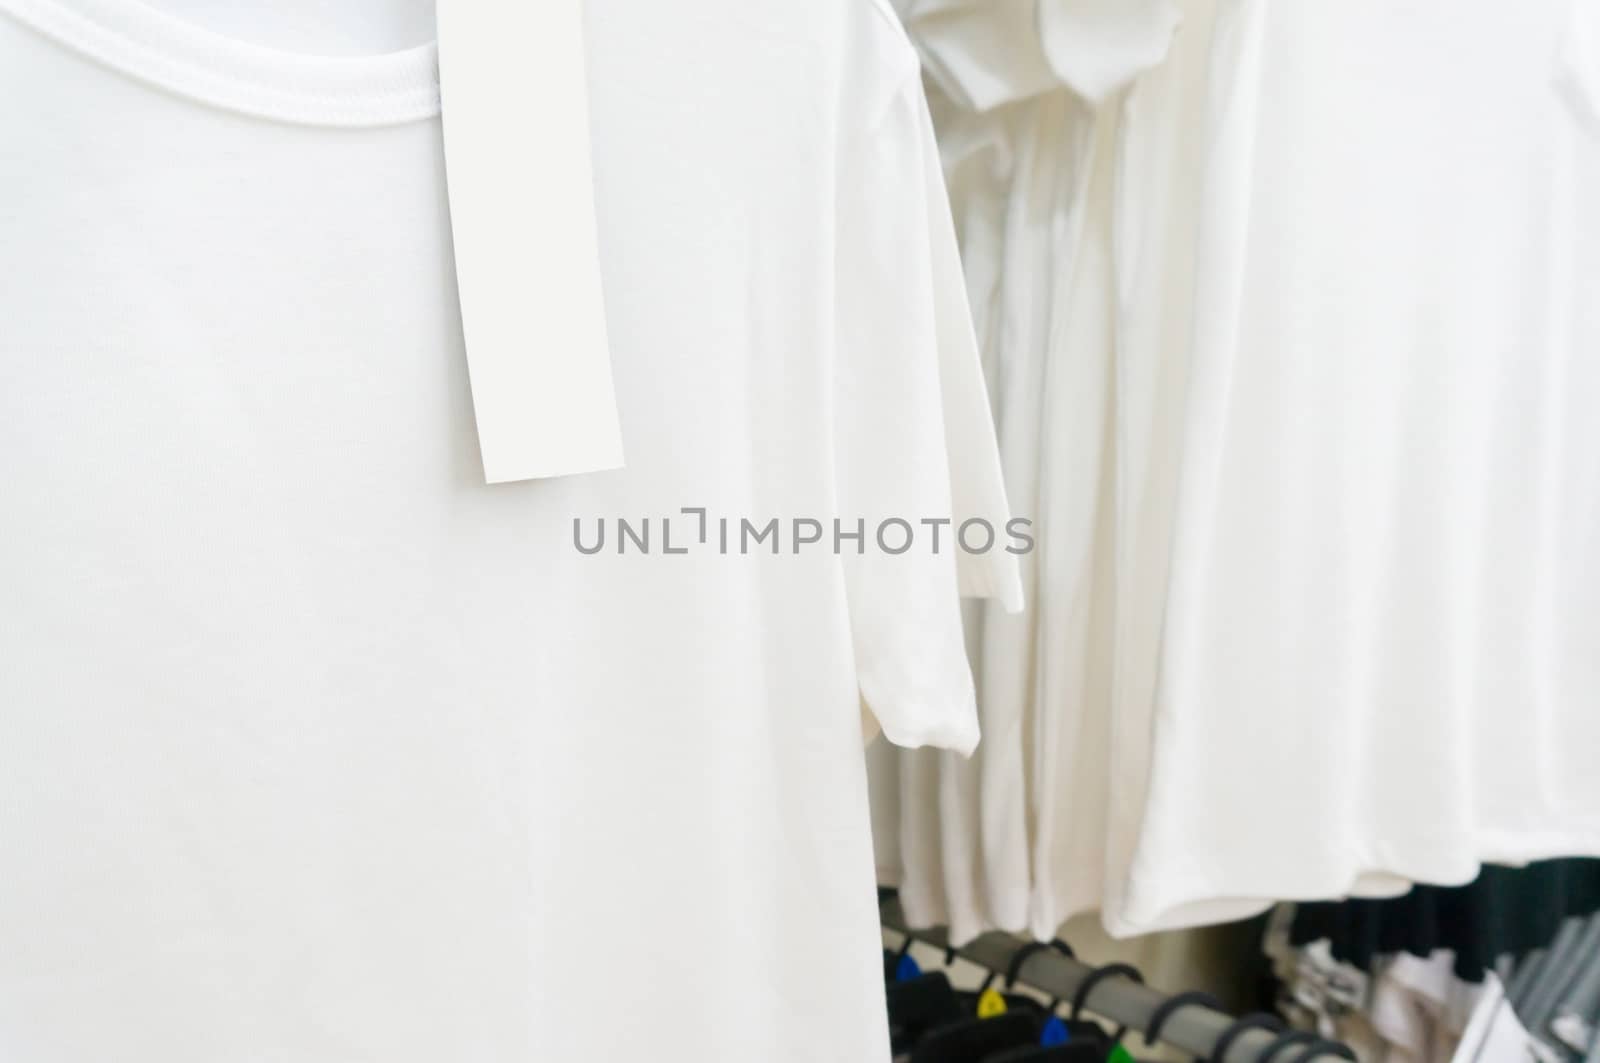 blank price tag hang over white tshirt on Hanger Shelf in Superm by thampapon